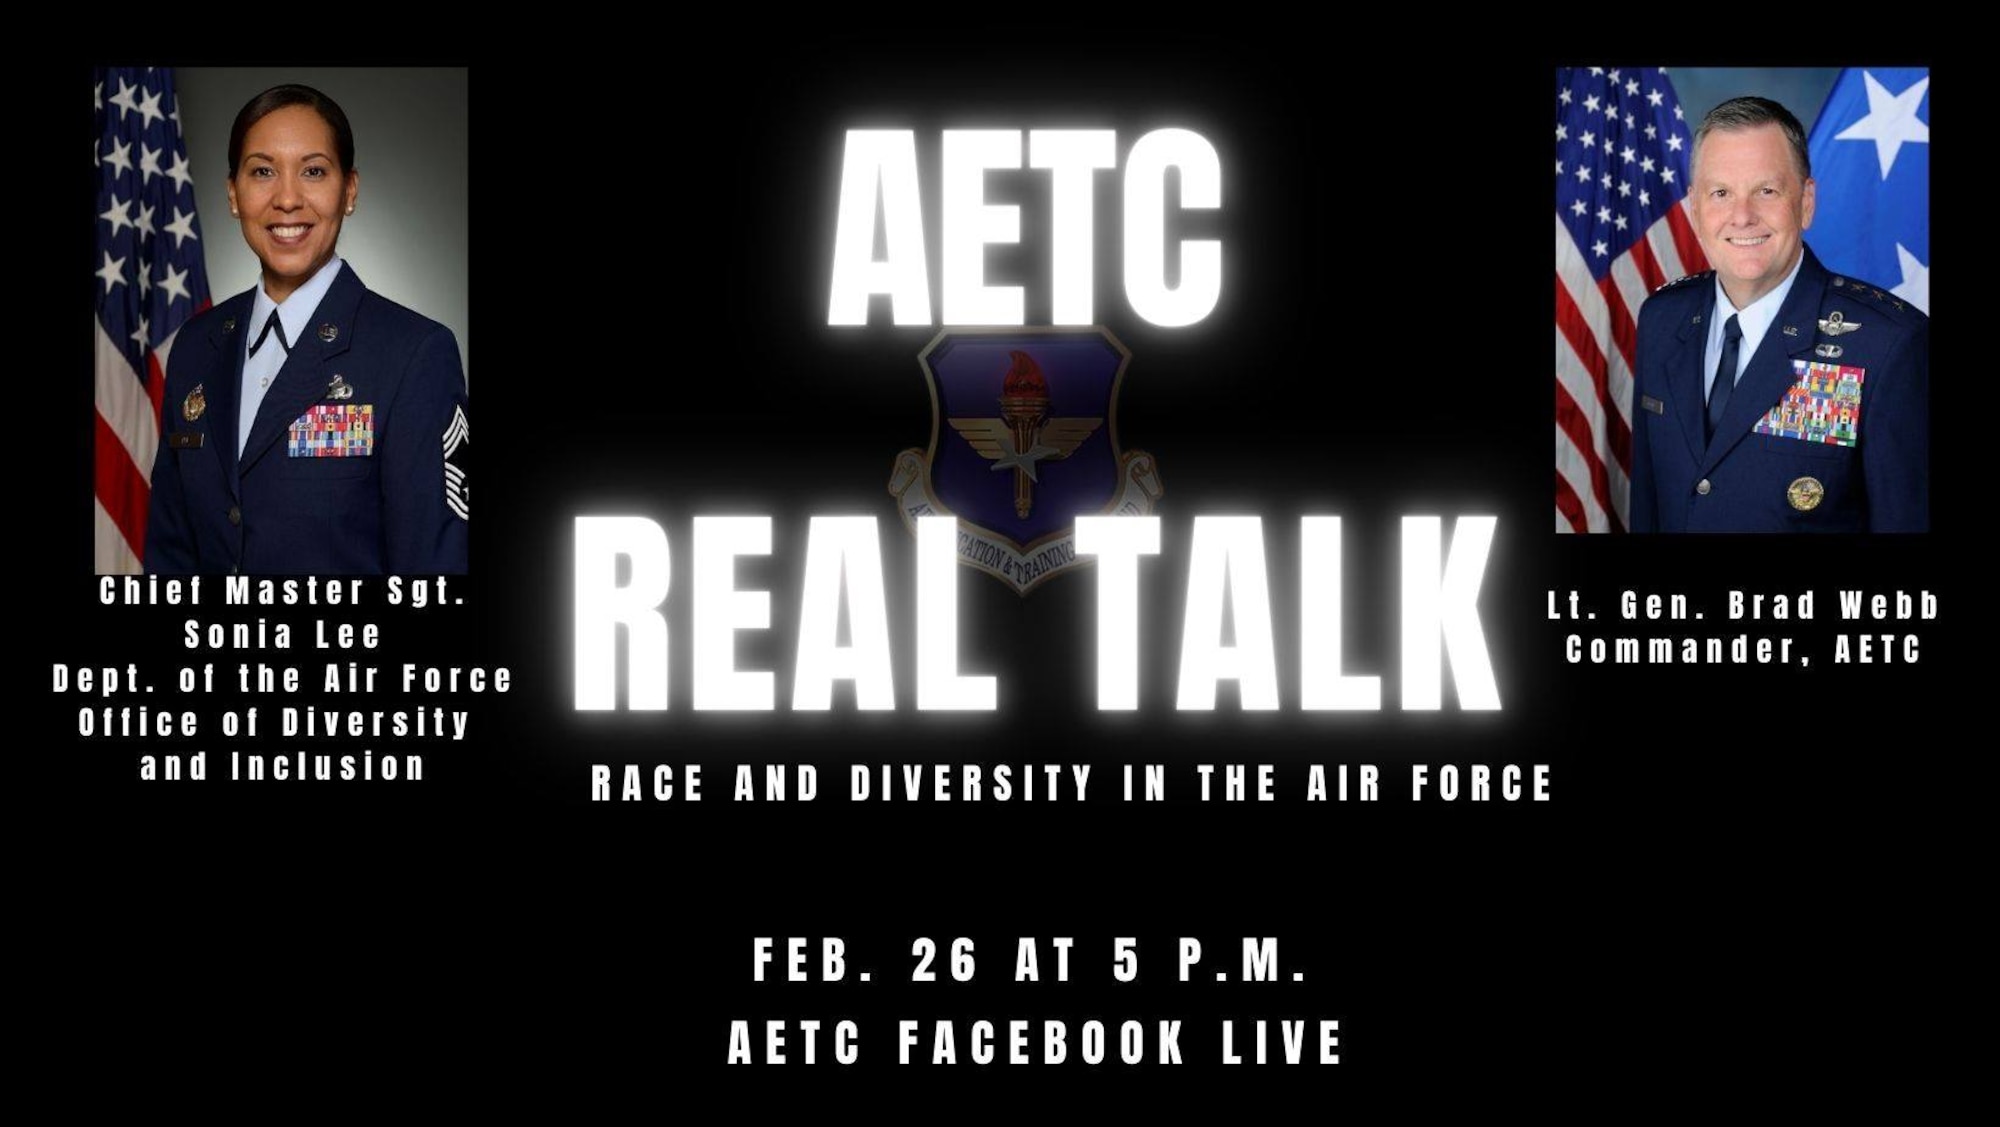 Lt. Gen. Brad Webb, commander of Air Education and Training Command, is scheduled to host the fifth episode of AETC Real Talk: Race and Diversity in the Air Force Feb. 26 at 5 p.m. on AETC’s Facebook page.